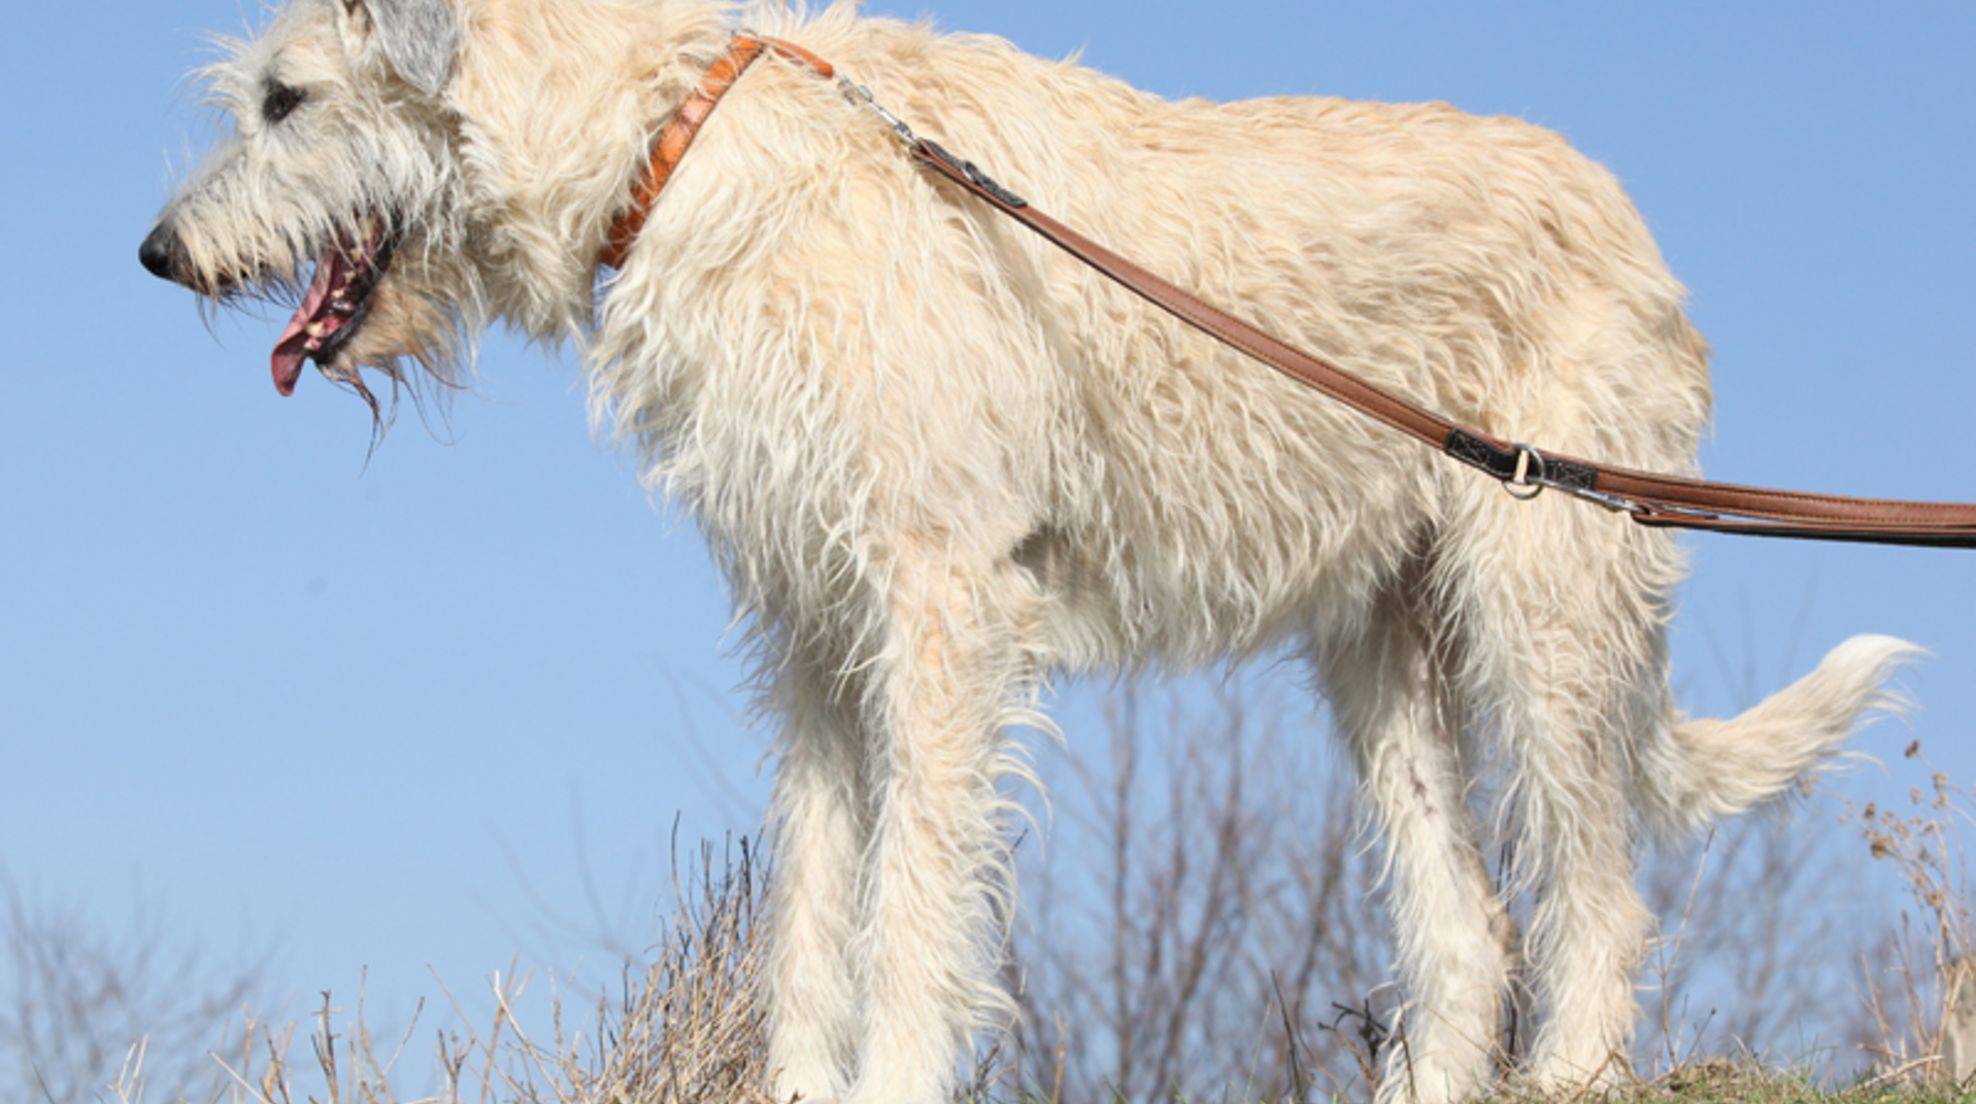 Irish wolfhounds from shelter